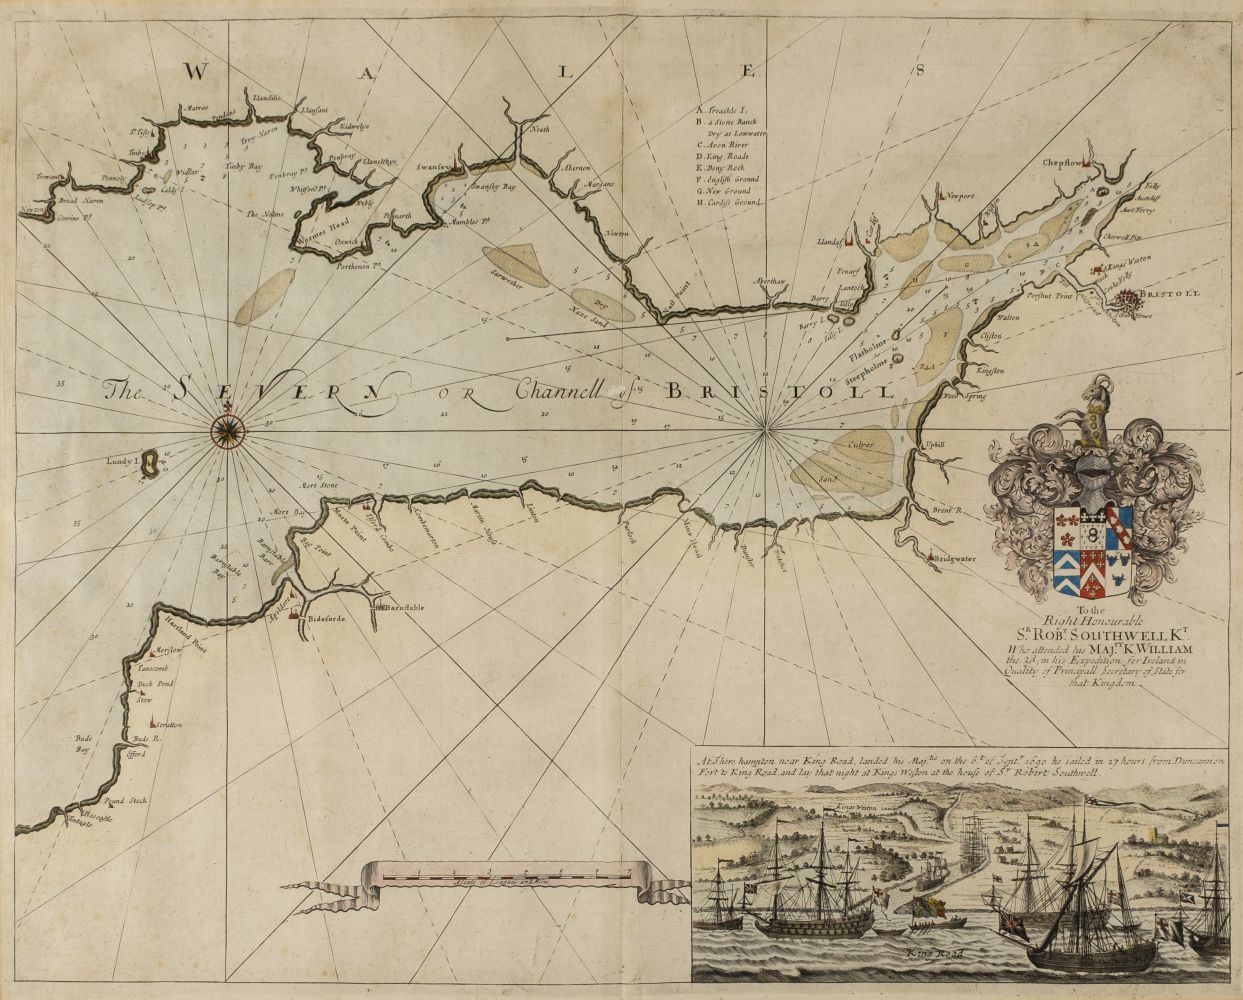 * Sea charts. Collins (Captain Greenville), The Severn or Channell of Bristoll, circa 1720